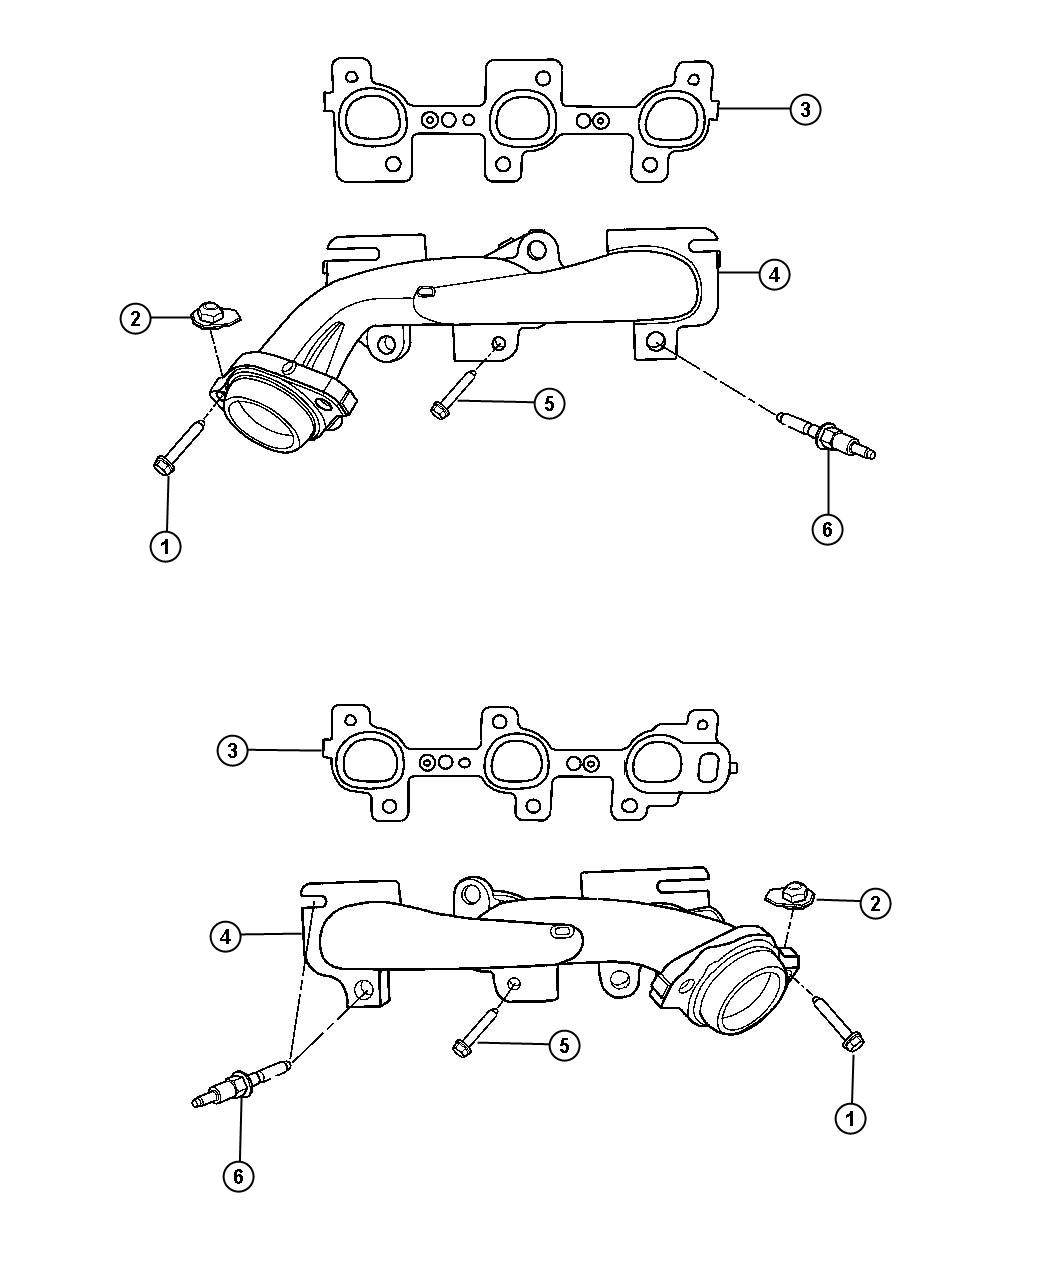 Ram 1500 Manifold. Exhaust. Right, right side. Engine, manifolds